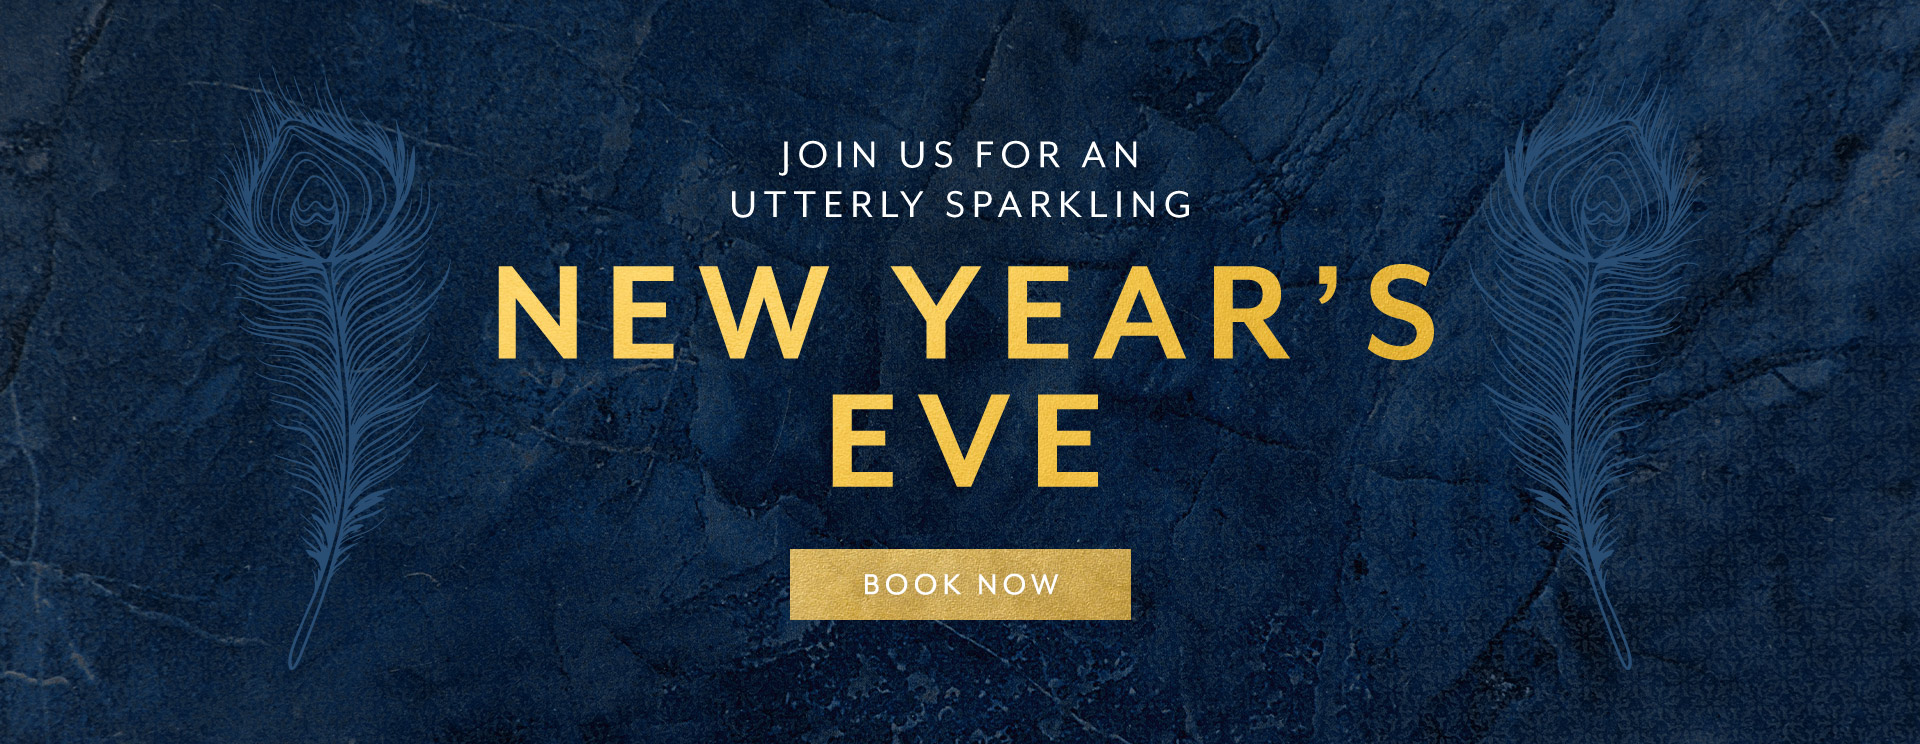 New Year's Eve at The Bell Inn